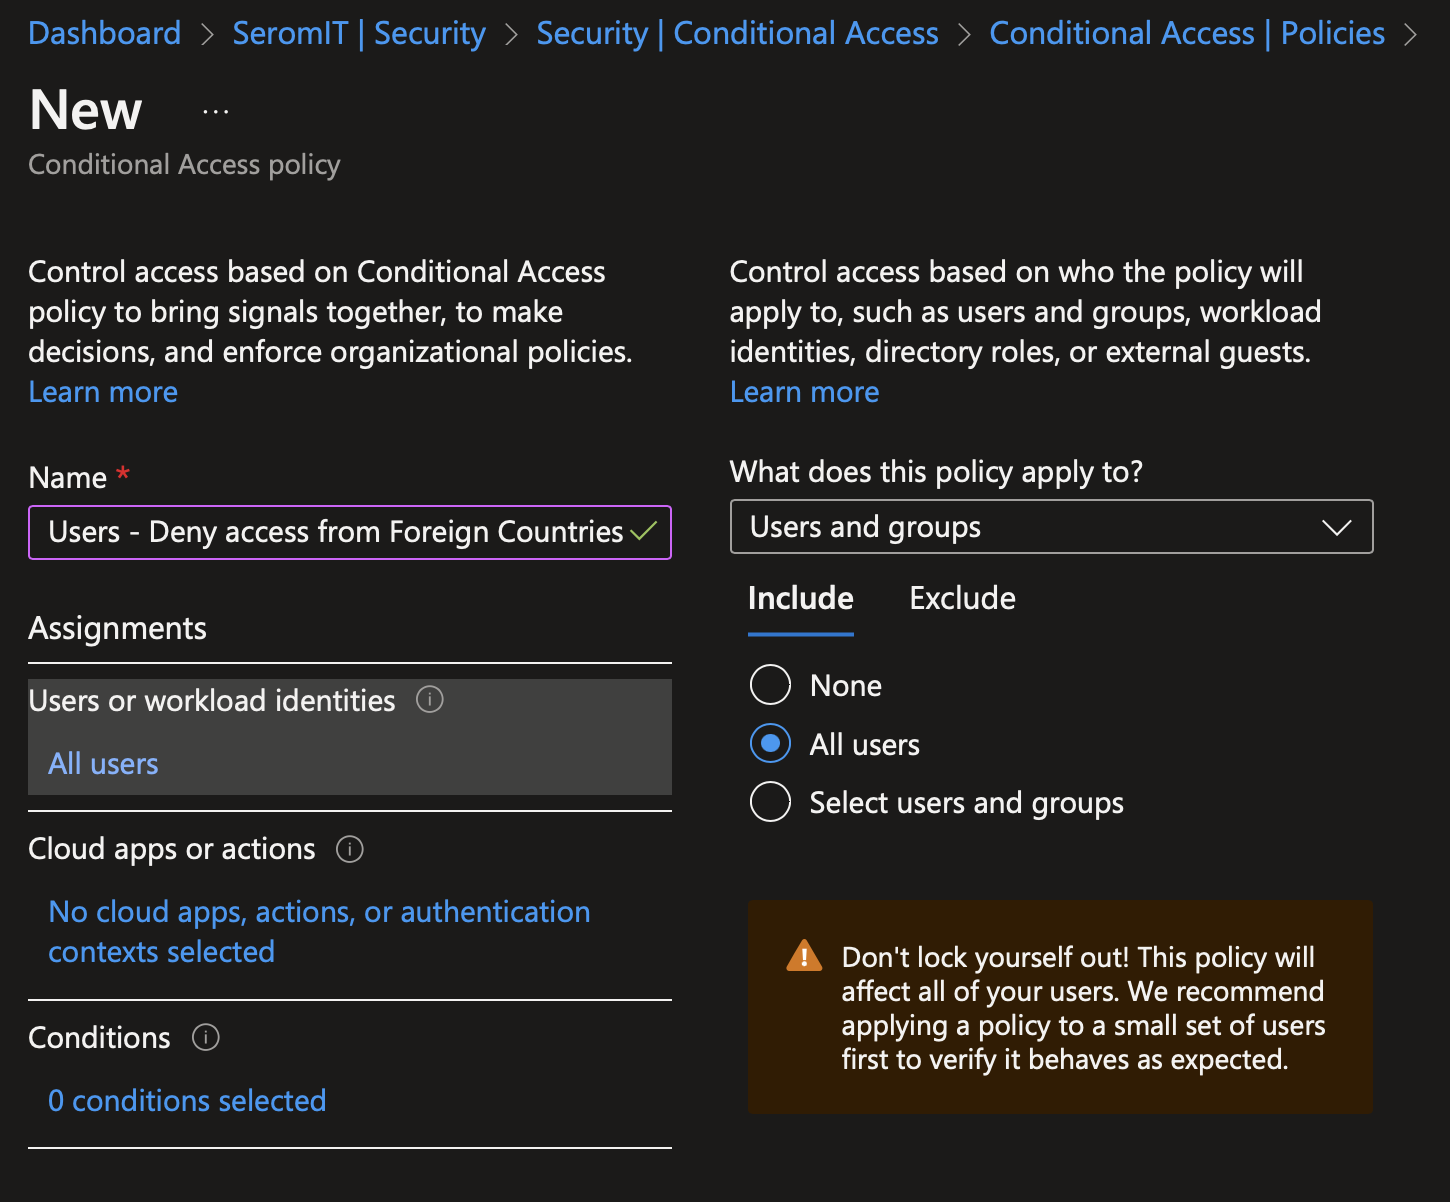 Conditional Access policy